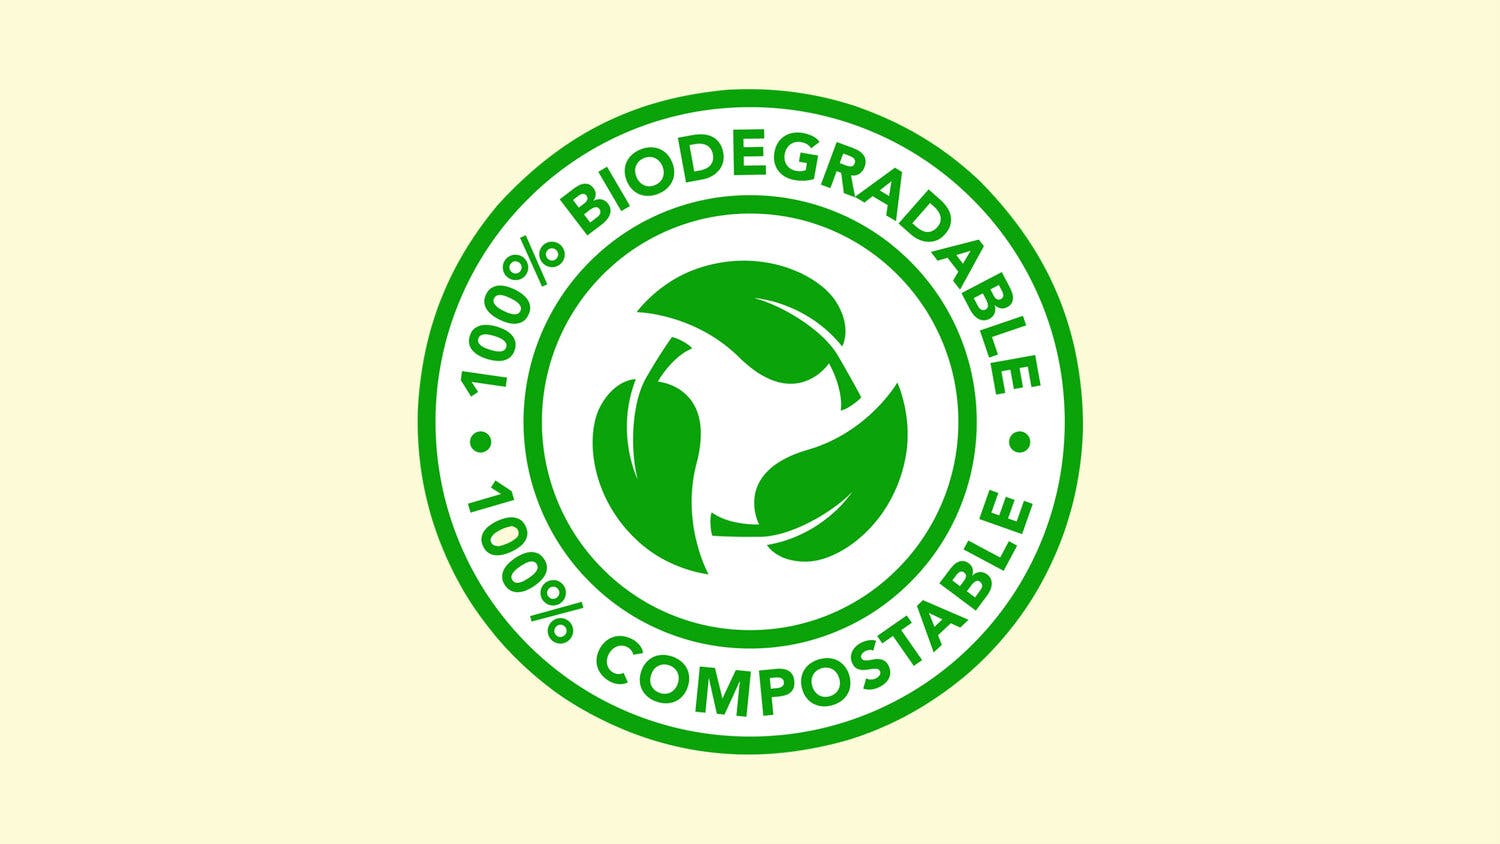 Certified Compostability